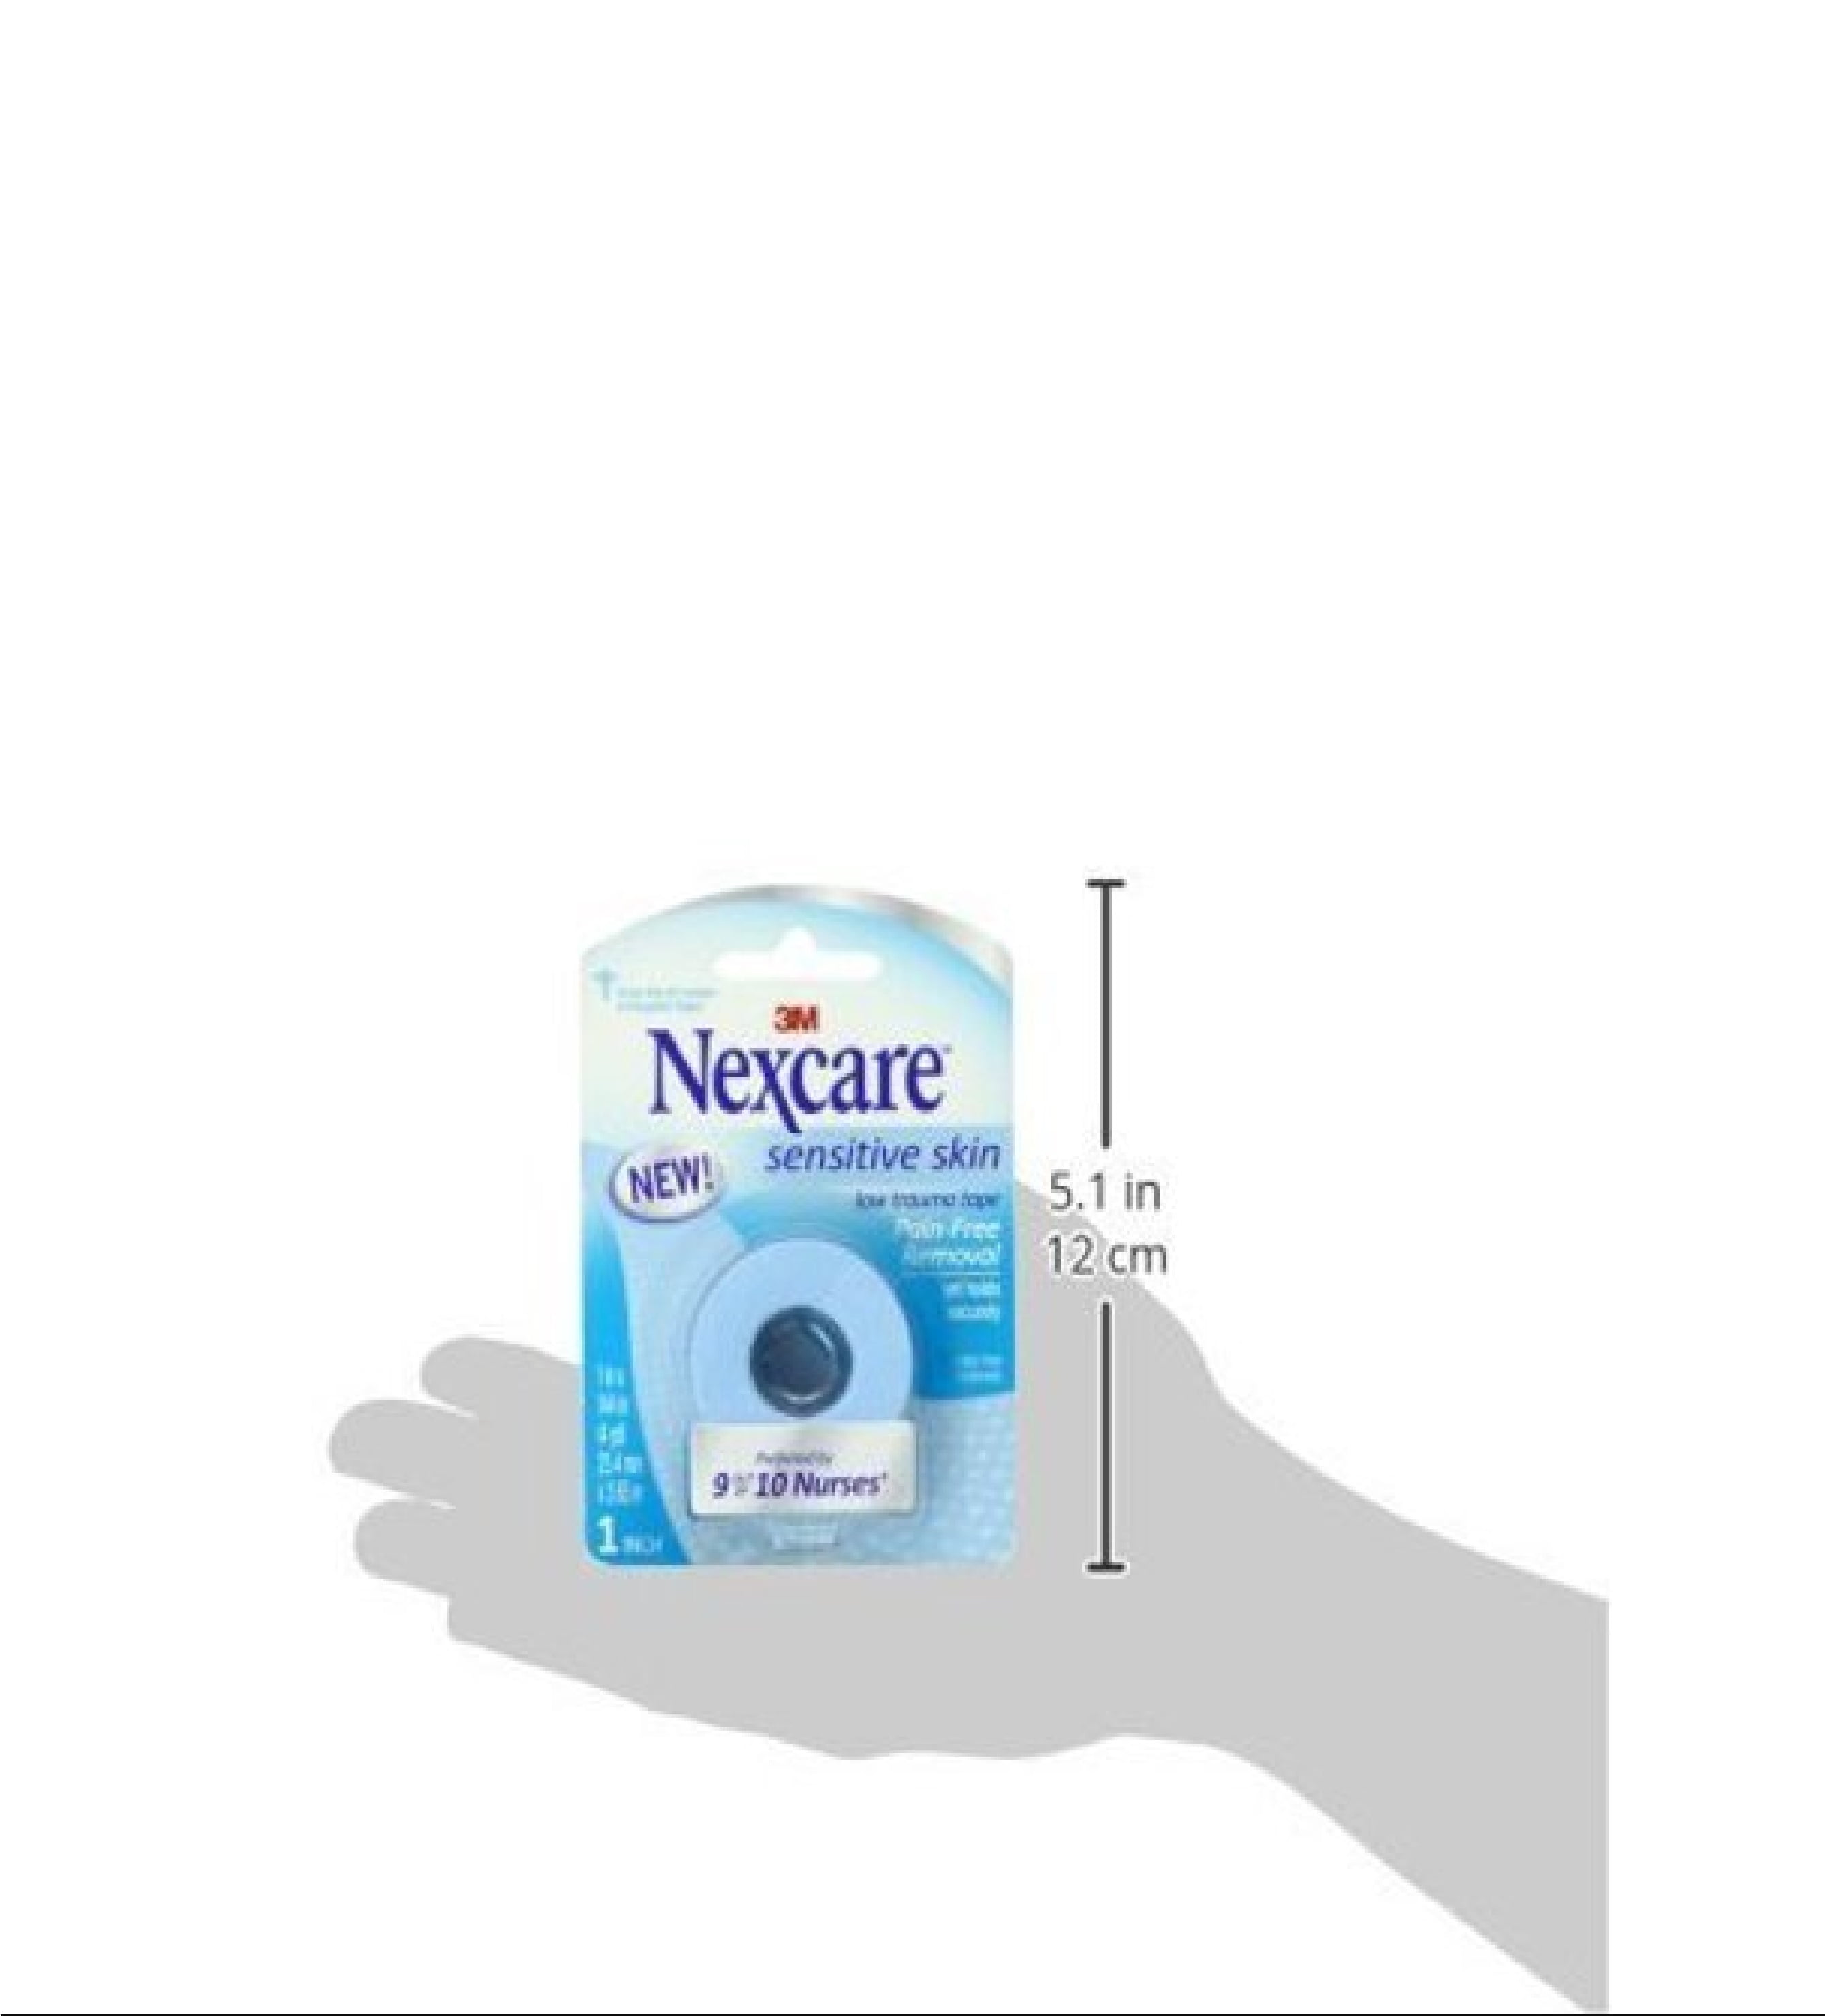 Nexcare Sensitive Skin Tape 1 inch x 4 Yards - The Online Drugstore ©